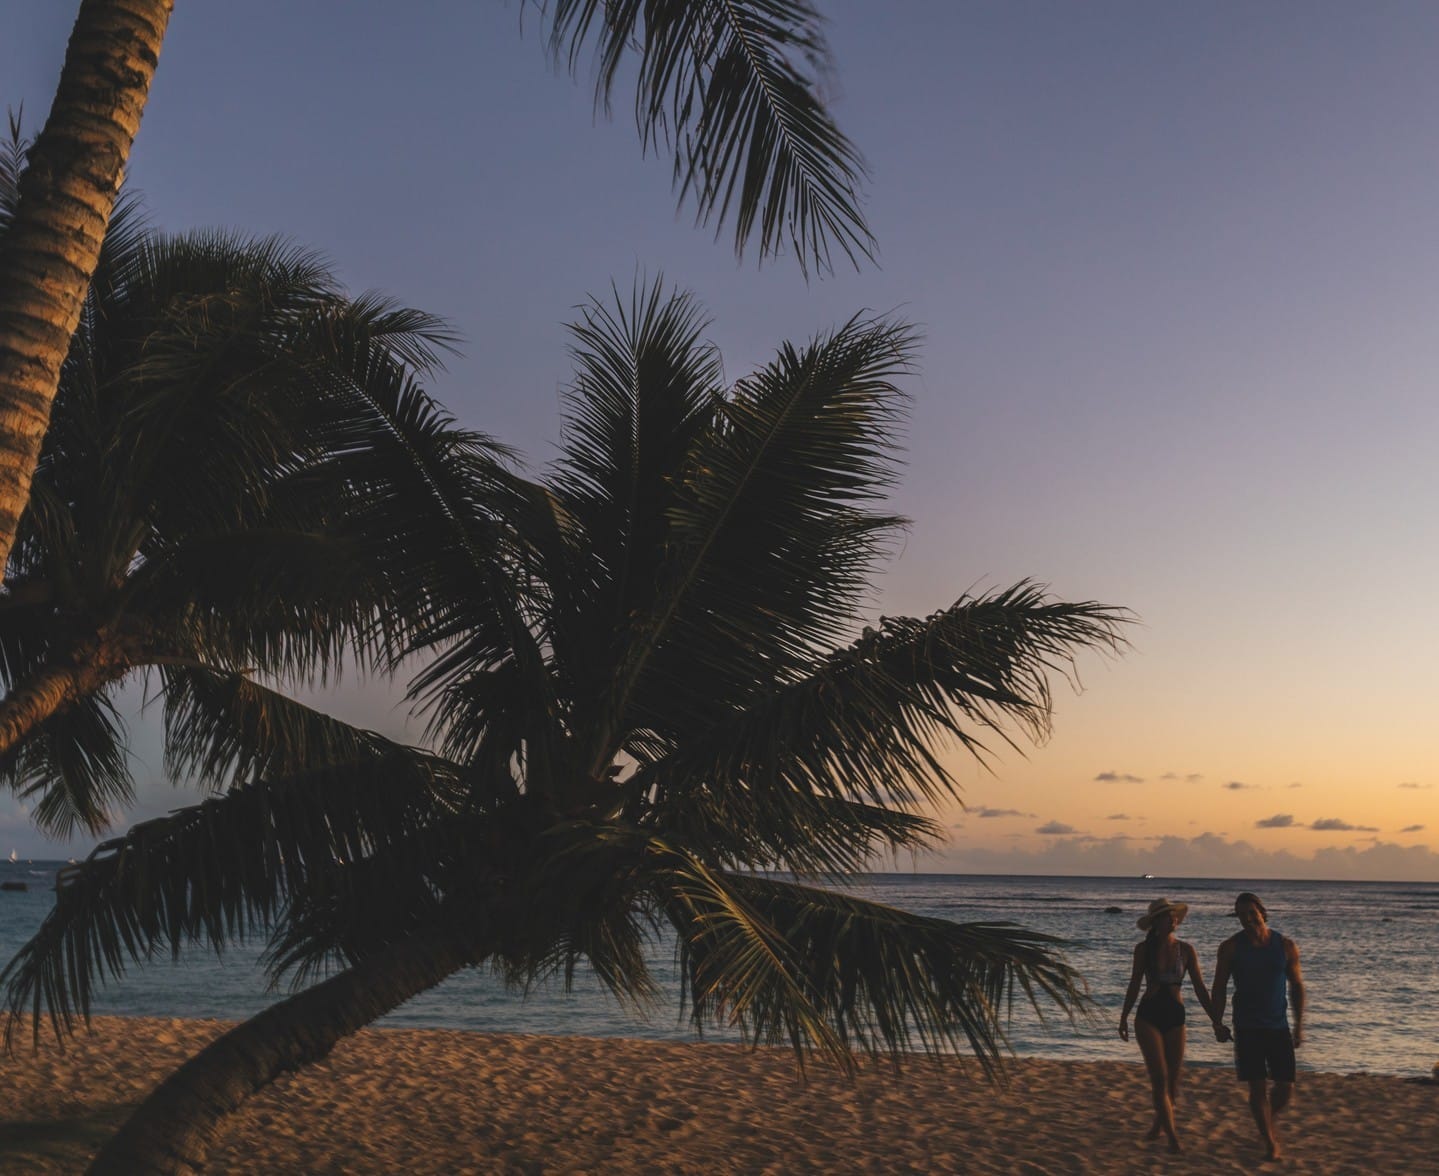 It&#039;s National Beach Day! Get outside and enjoy nearby Ala Moana Beach Park. With more than half a mile of white sand beach, this seaside destination is your spot for leisure and recreation.